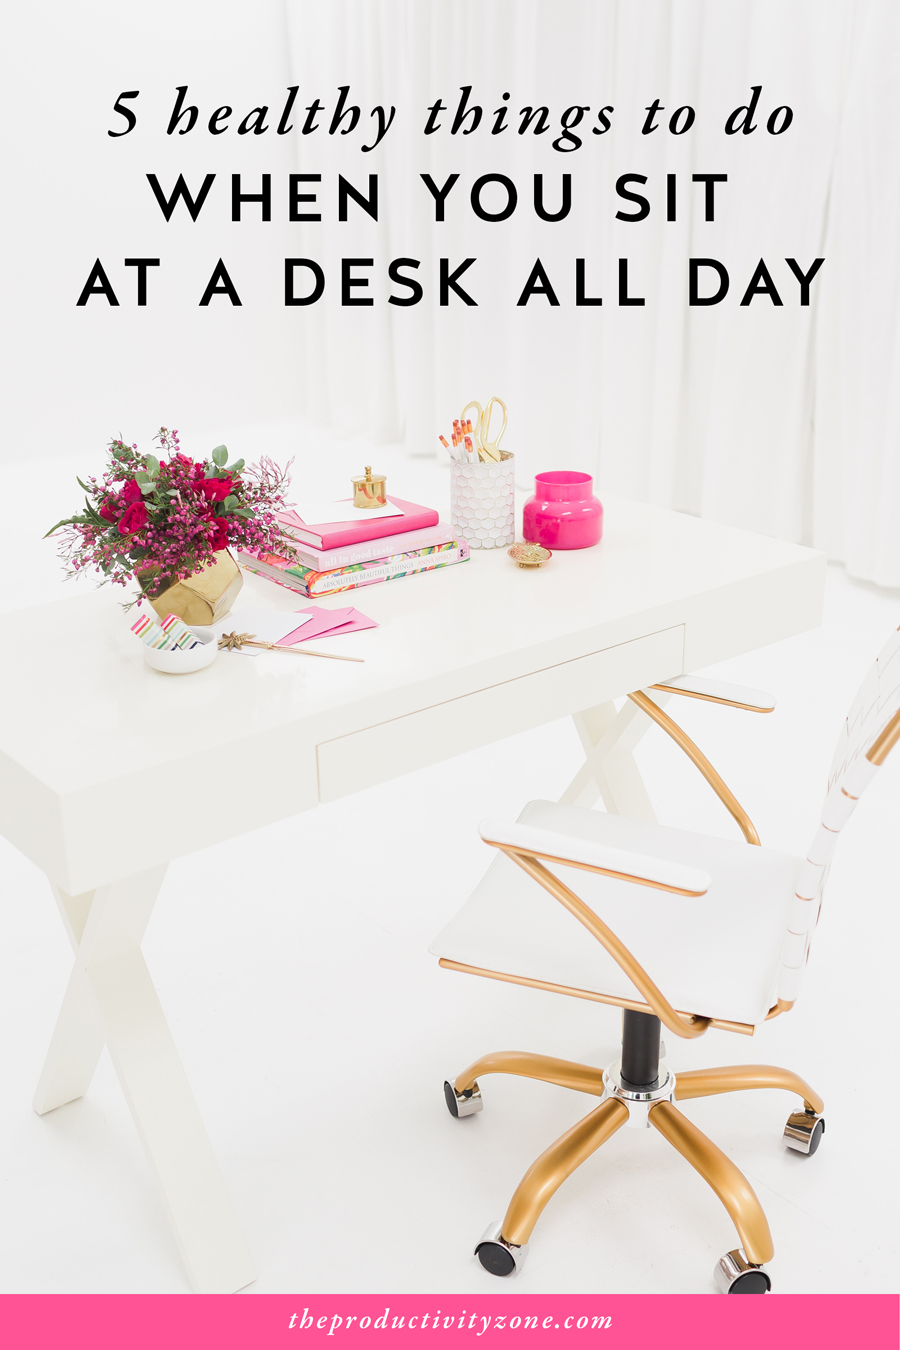 Small, healthy changes can and will better your female entrepreneur lifestyle if you practice them consistently for a long period of time. Over on The Productivity Zone, I suggest 5 healthy things you can do when you sit at a desk all day (and not one of them involves kale)!!